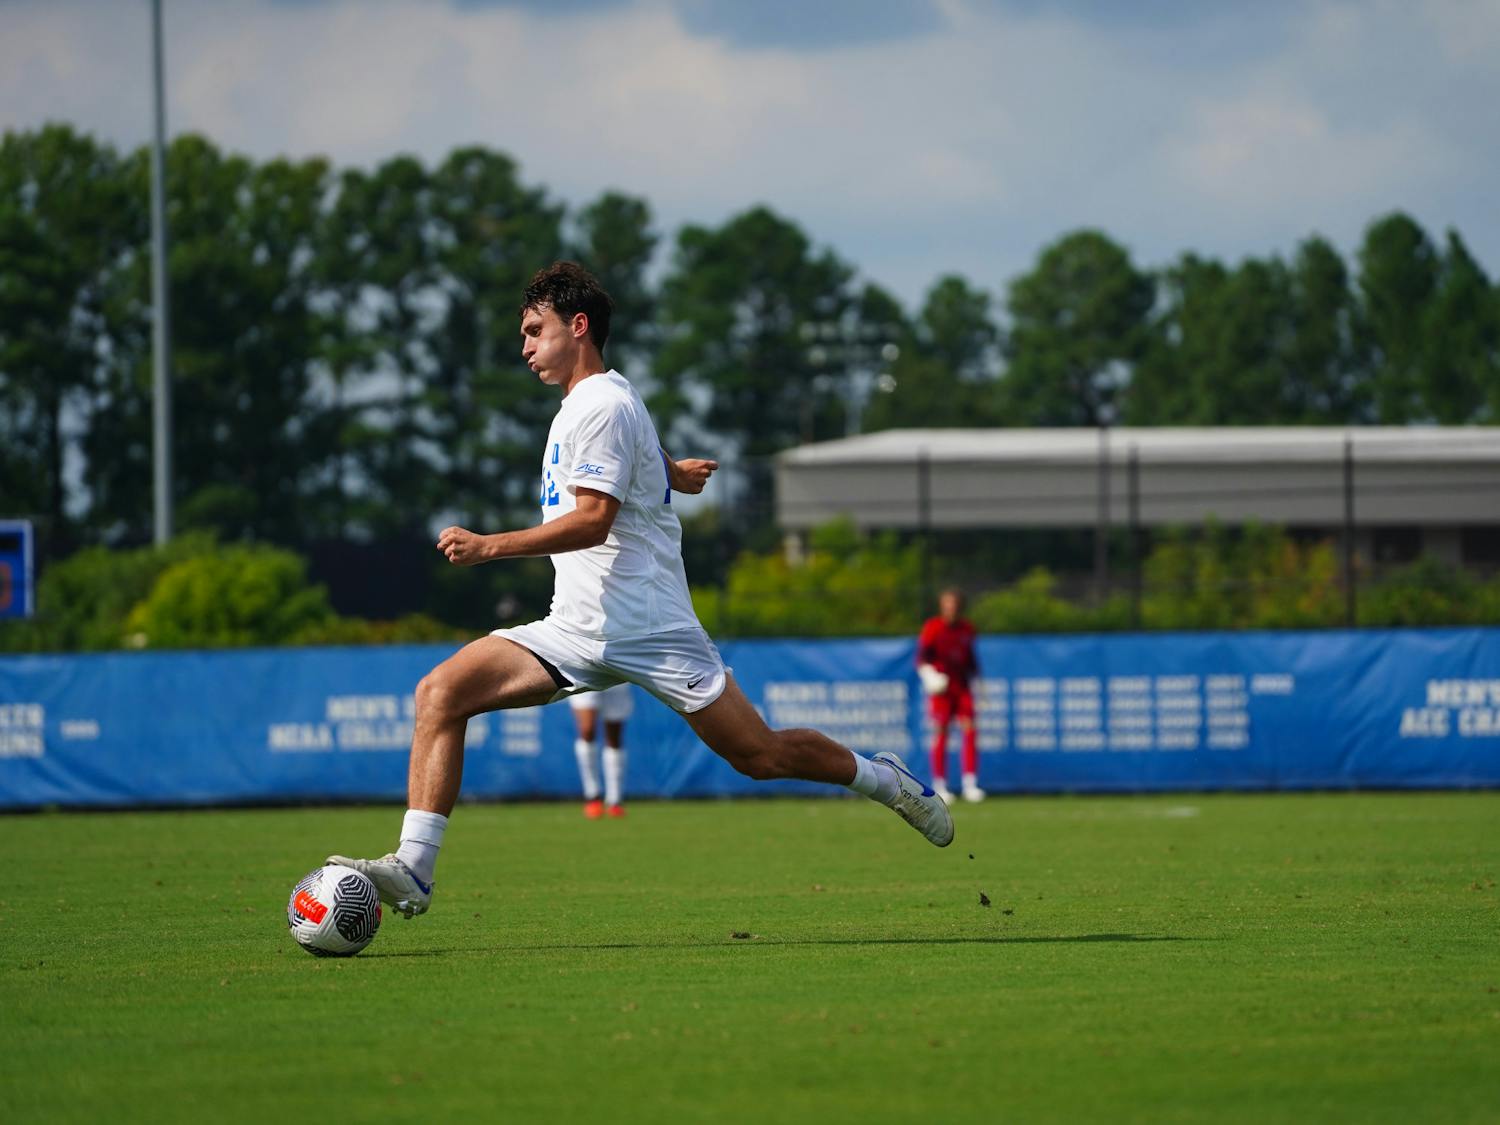 Junior midfielder Ruben Mesalles takes control of the ball during Duke's home defeat of Furman.